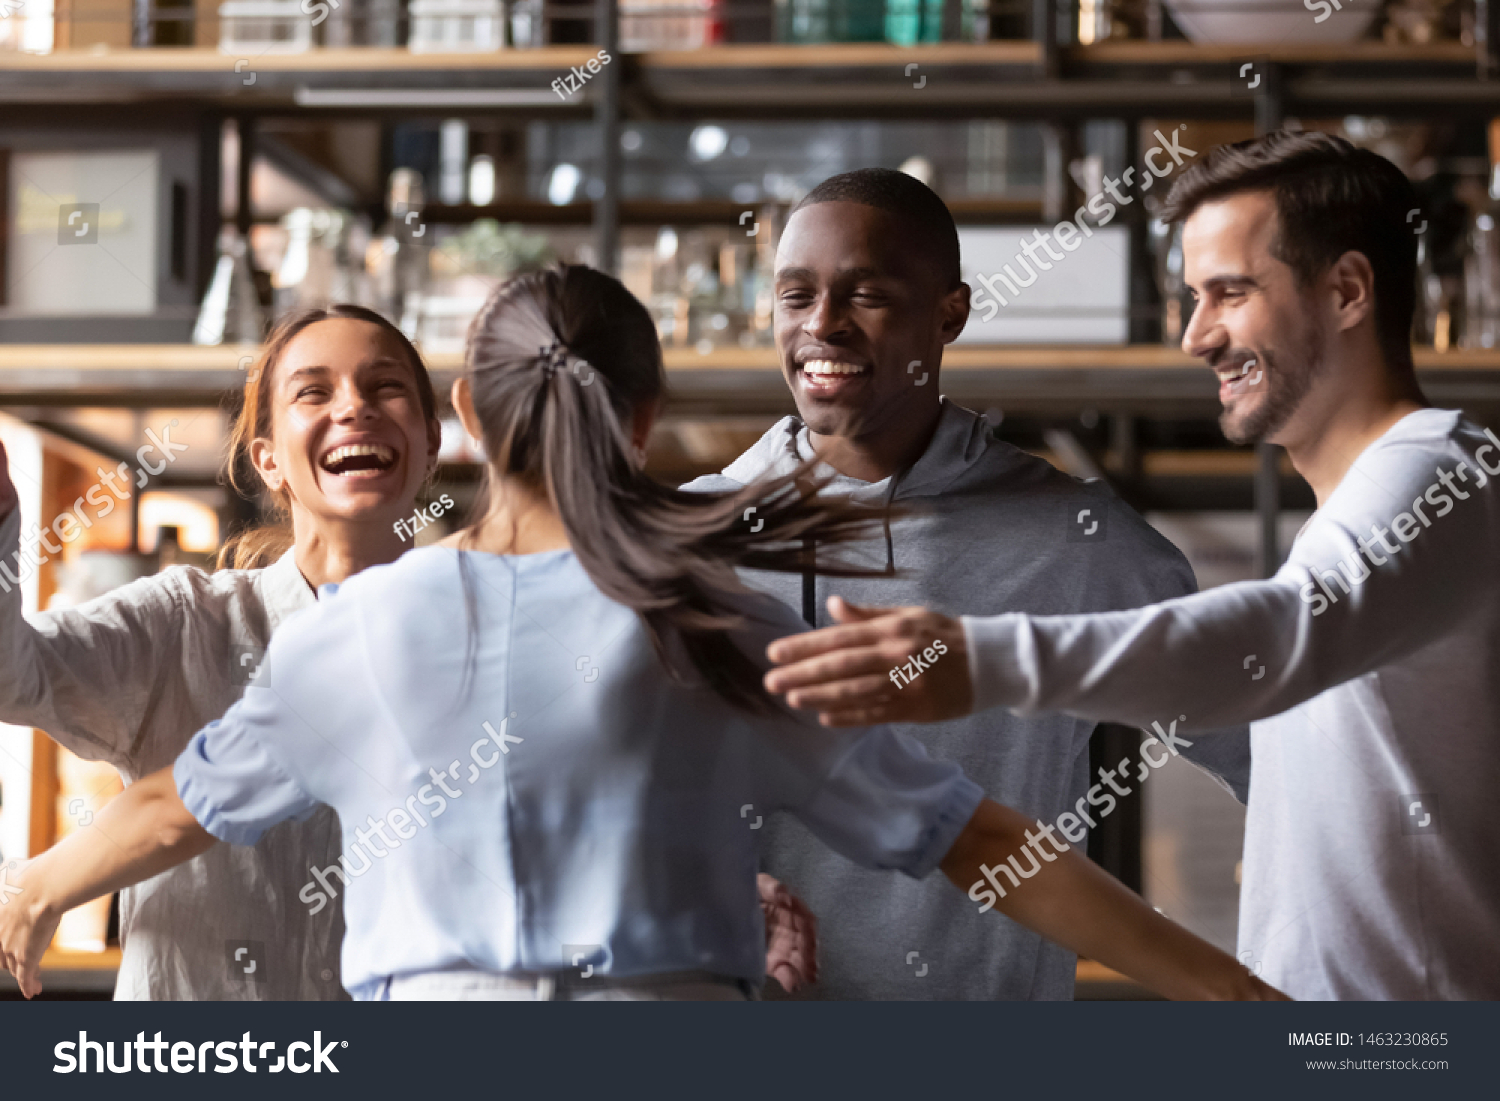 Excited multiracial young people hanging out together in cafe meeting new girlfriend giving hug, happy diverse friends feel overjoyed welcoming colleague relaxing having fun in bar or restaurant #1463230865